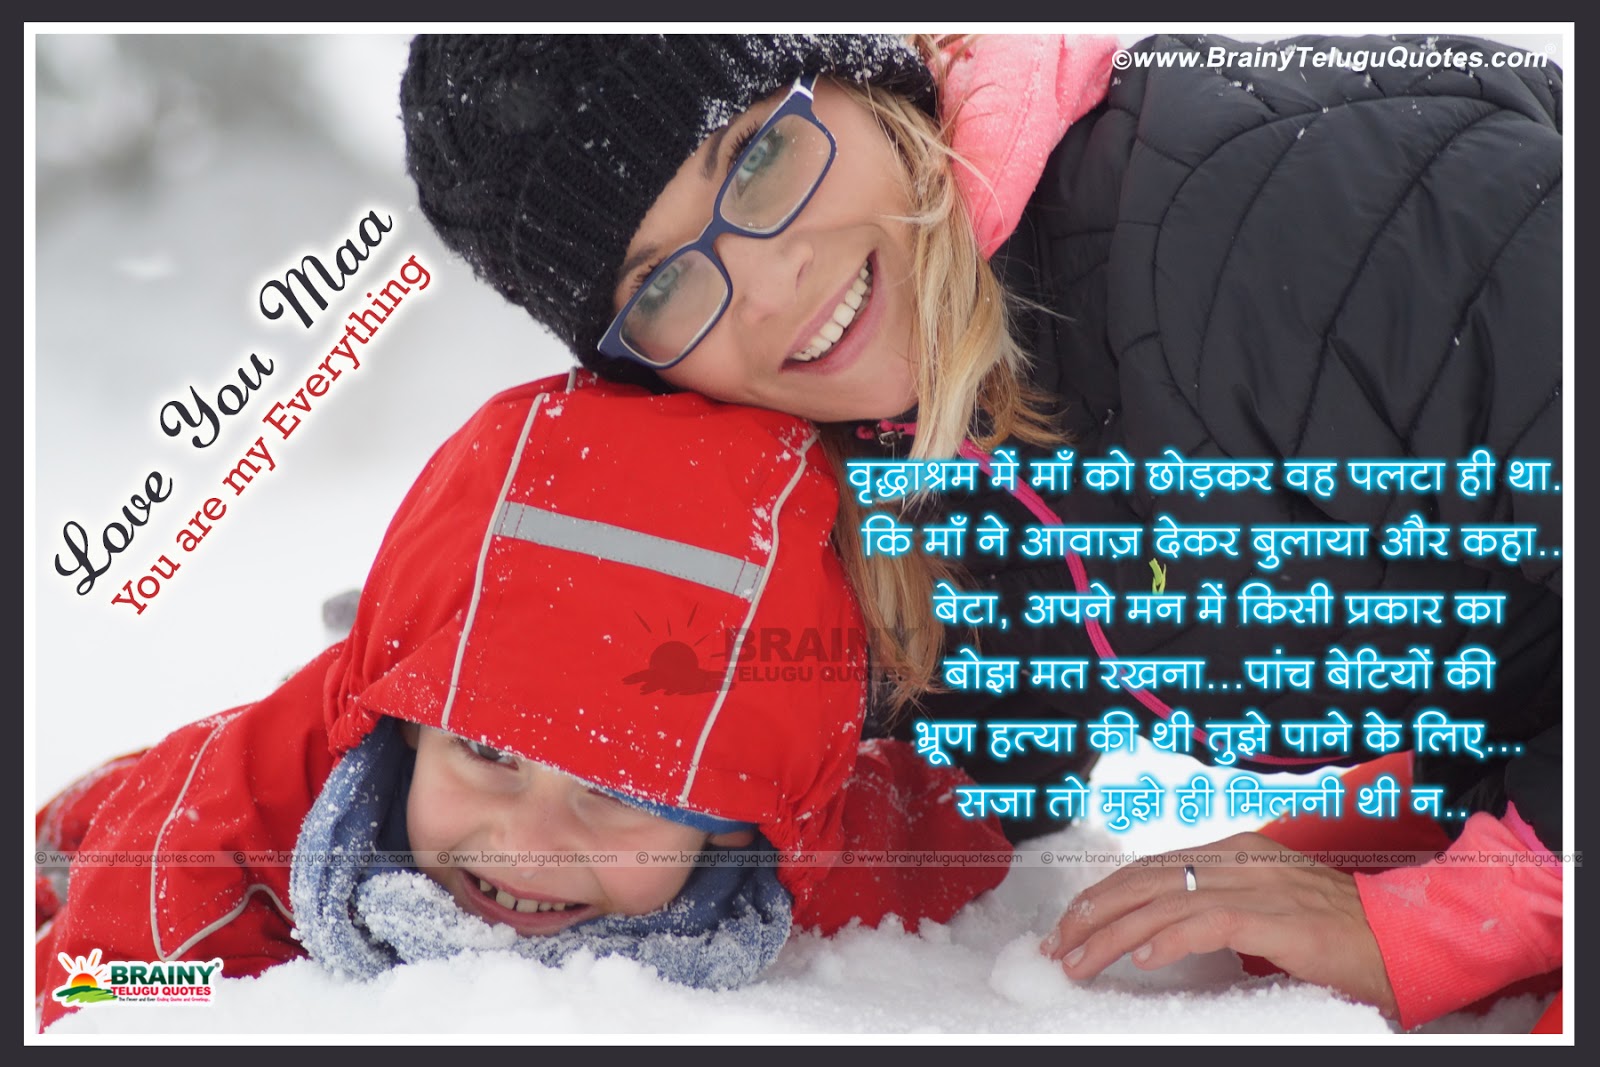 Beautiful Heart Touching Mother Quotes Shayari Sms Messages In Hindi Language With Mother And Baby Hd Wallpapers Brainyteluguquotes Comtelugu Quotes English Quotes Hindi Quotes Tamil Quotes Greetings